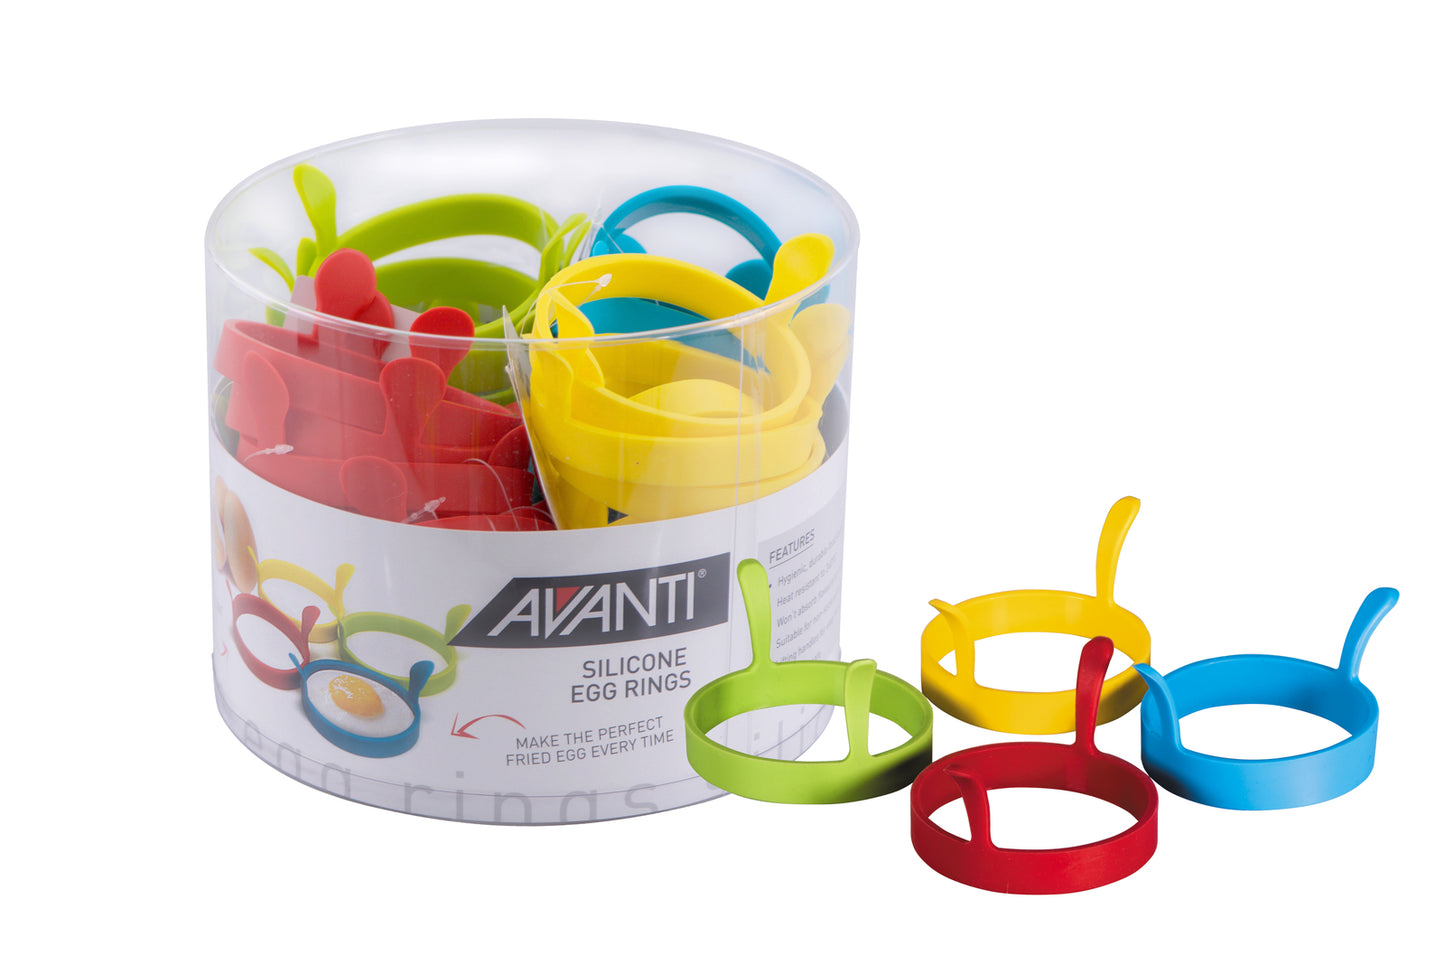 Avanti Silicone Egg Ring Assorted Colors